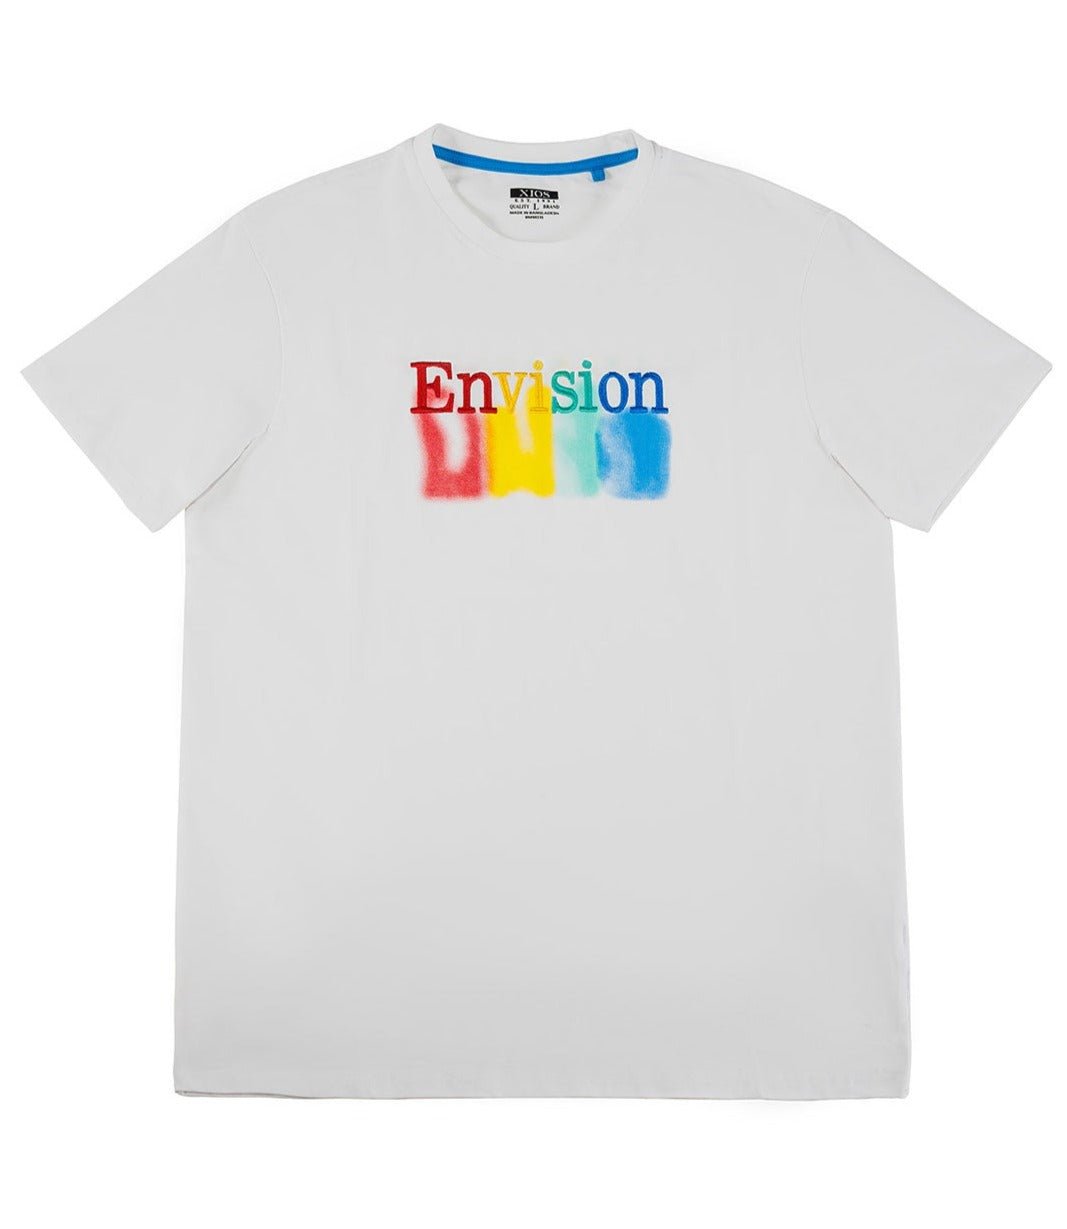 "Envision" Graphic Tee